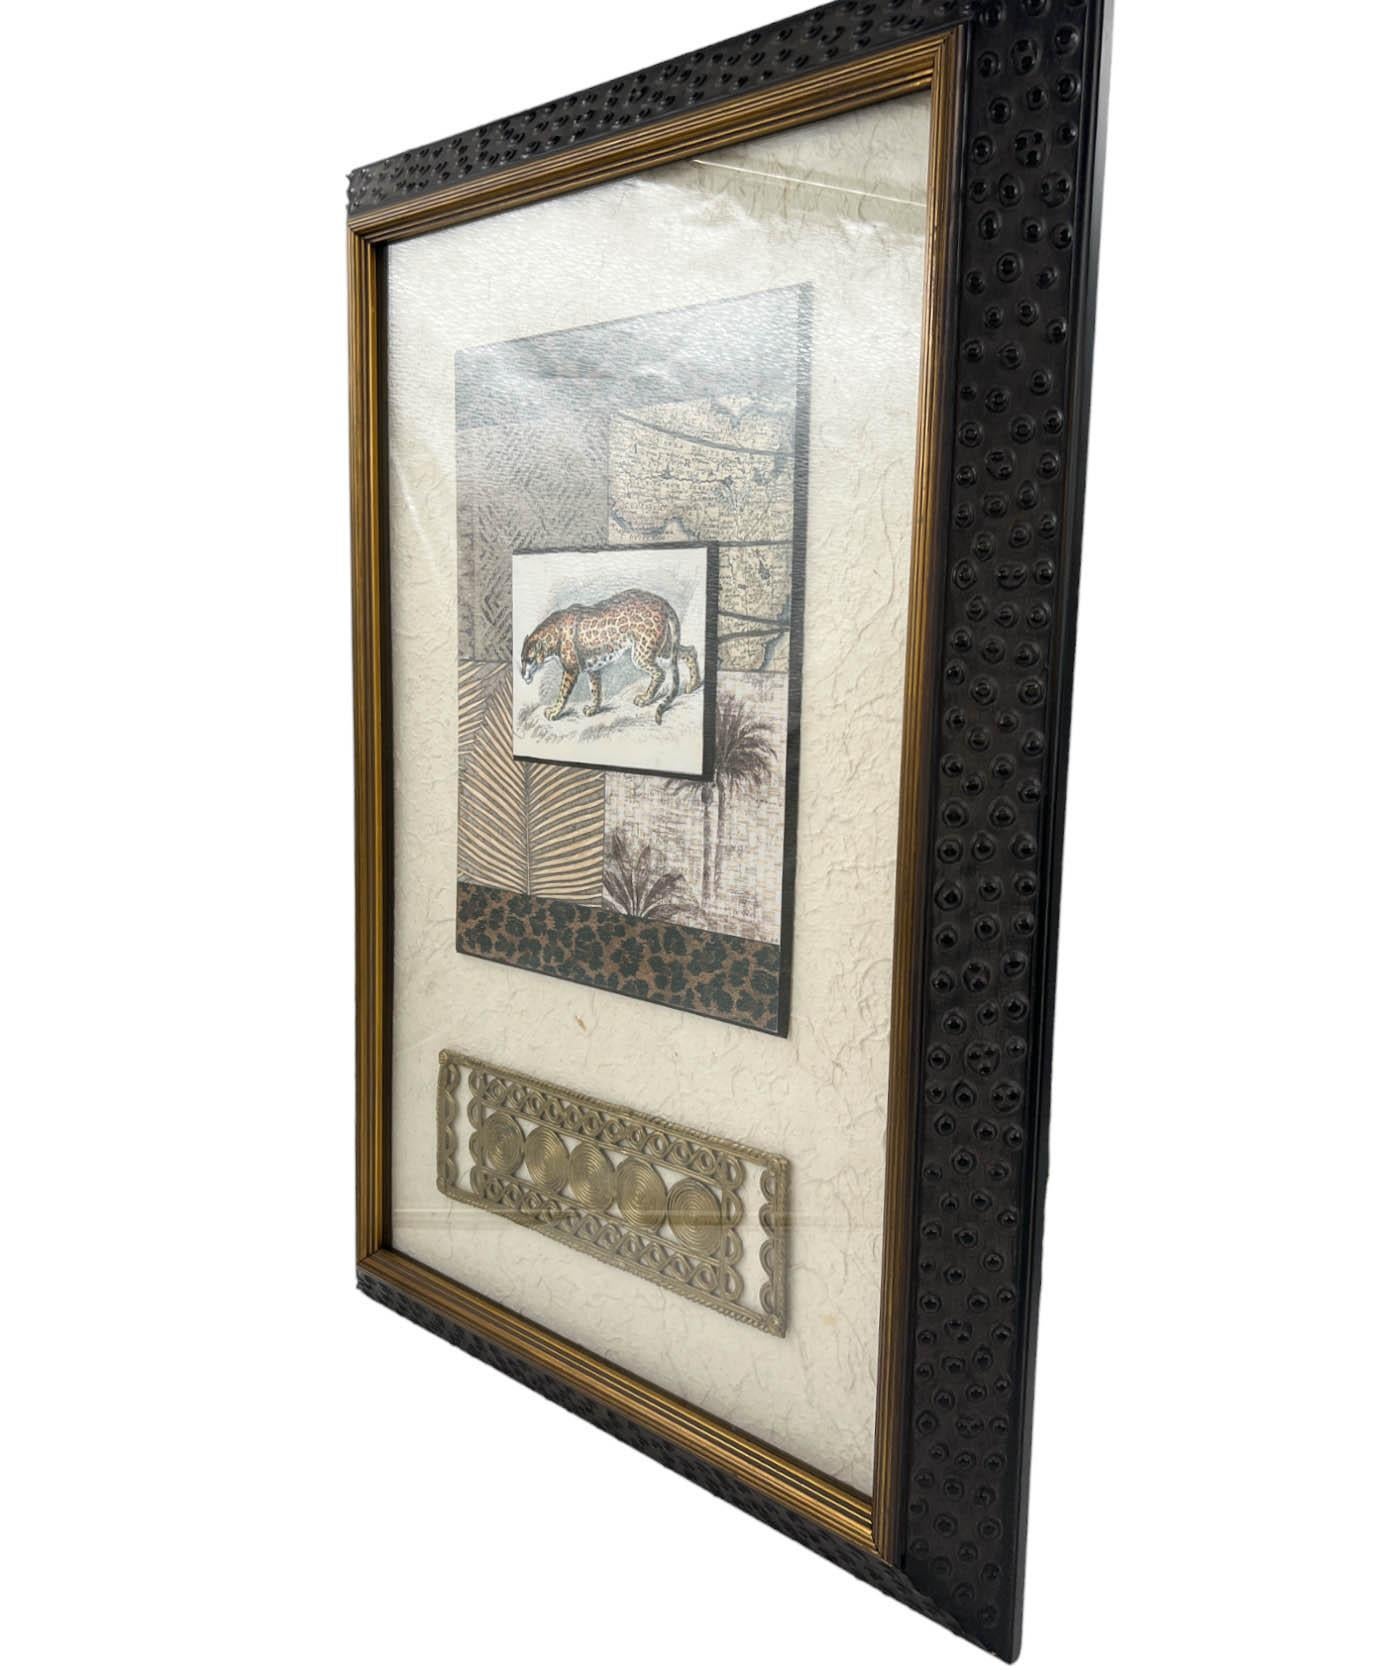 A  mixed media collage by design house JOHN RICHARD. This piece combines elements of nature, featuring a depiction of a leopard crafted on bark paper. The collage is encased behind glass and  framed in an ostrich-style frame made of bone. Using